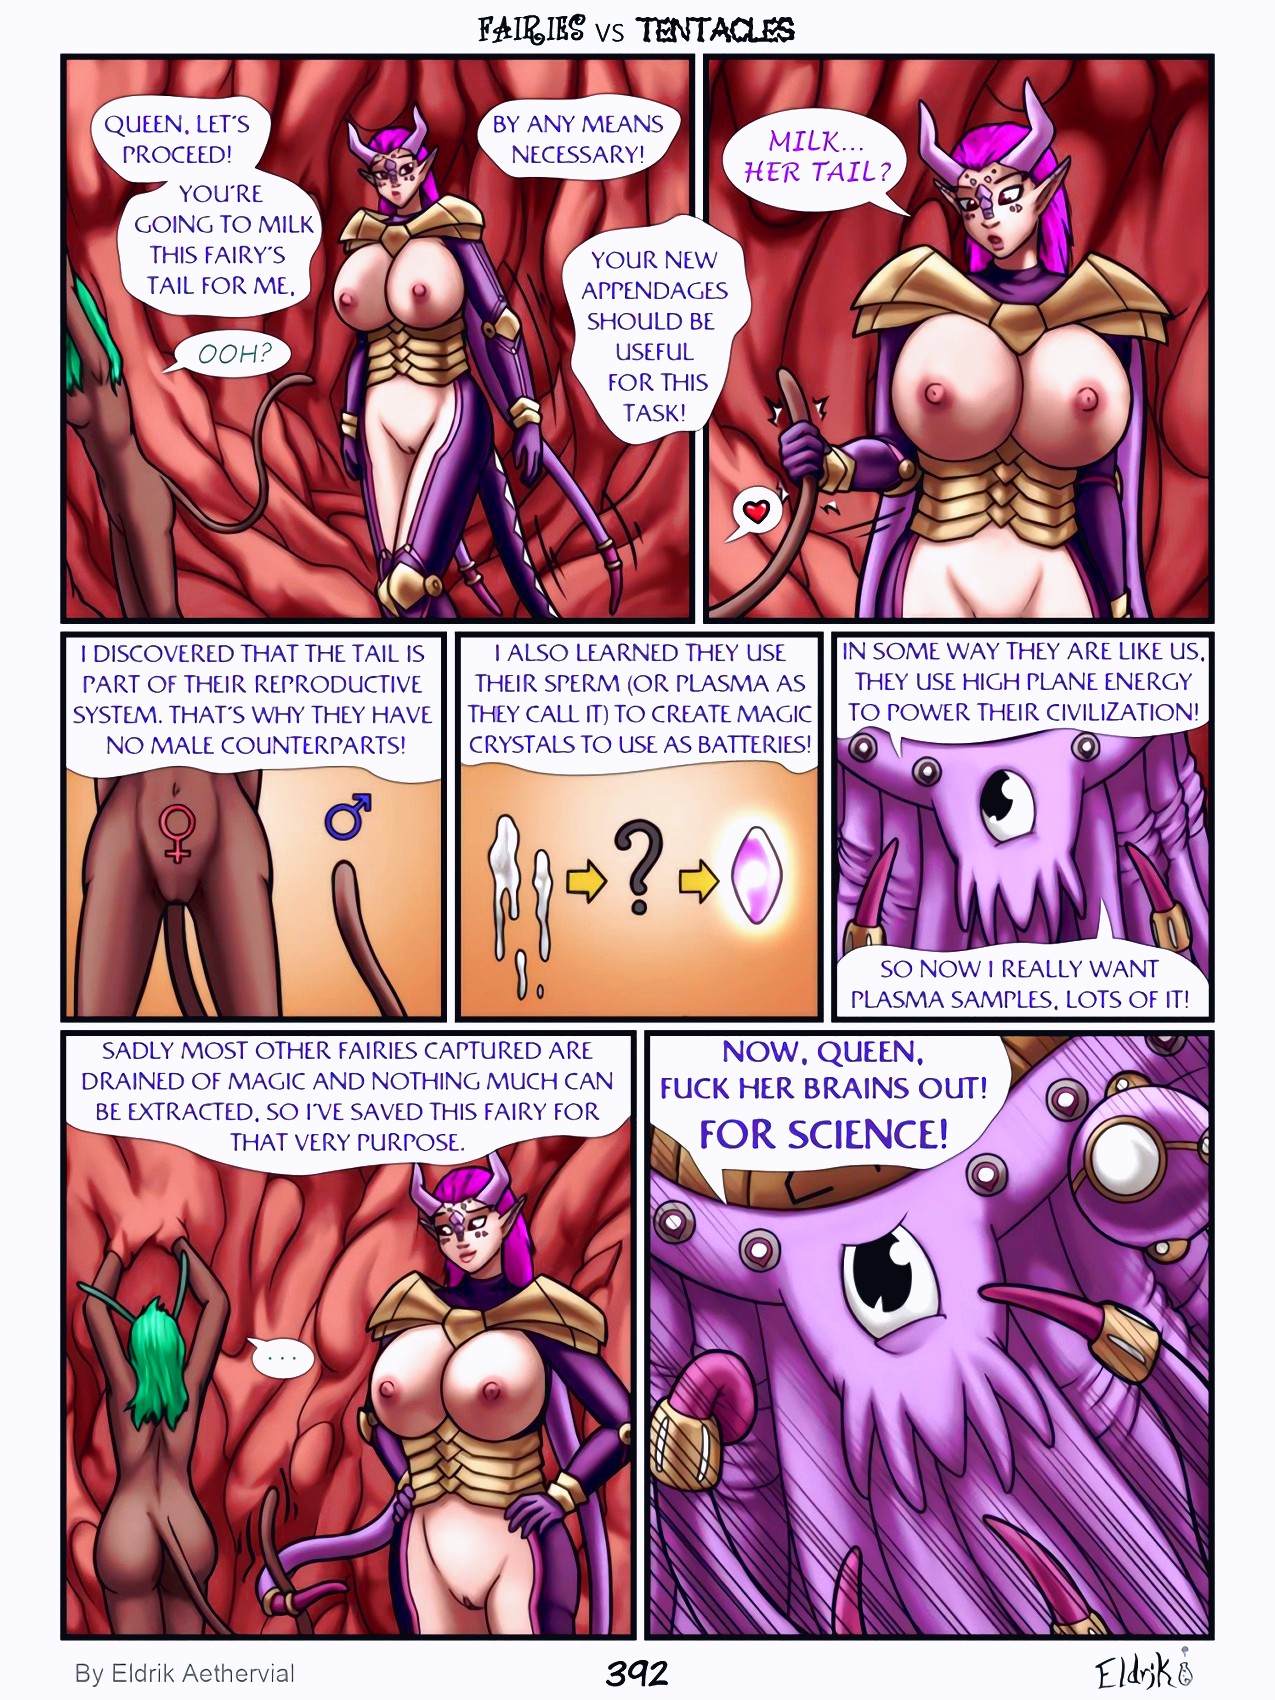 Fairies vs Tentacles page 393